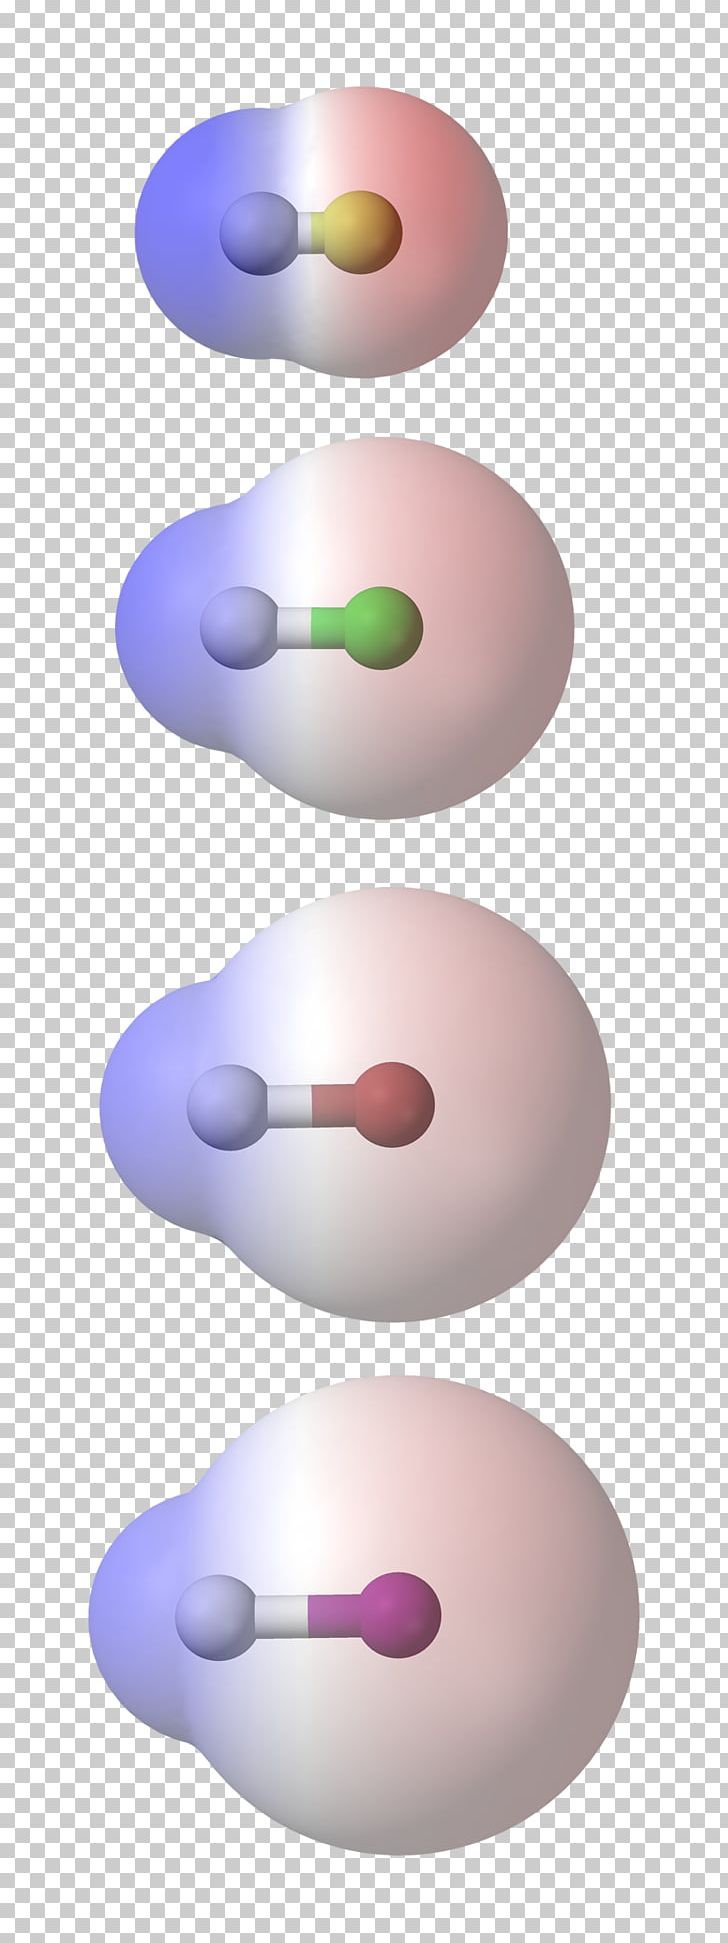 Chemical Polarity Molecule Covalent Bond Electronegativity PNG, Clipart, Chemical Bond, Chemical Polarity, Chemistry, Computer Wallpaper, Covalent Bond Free PNG Download